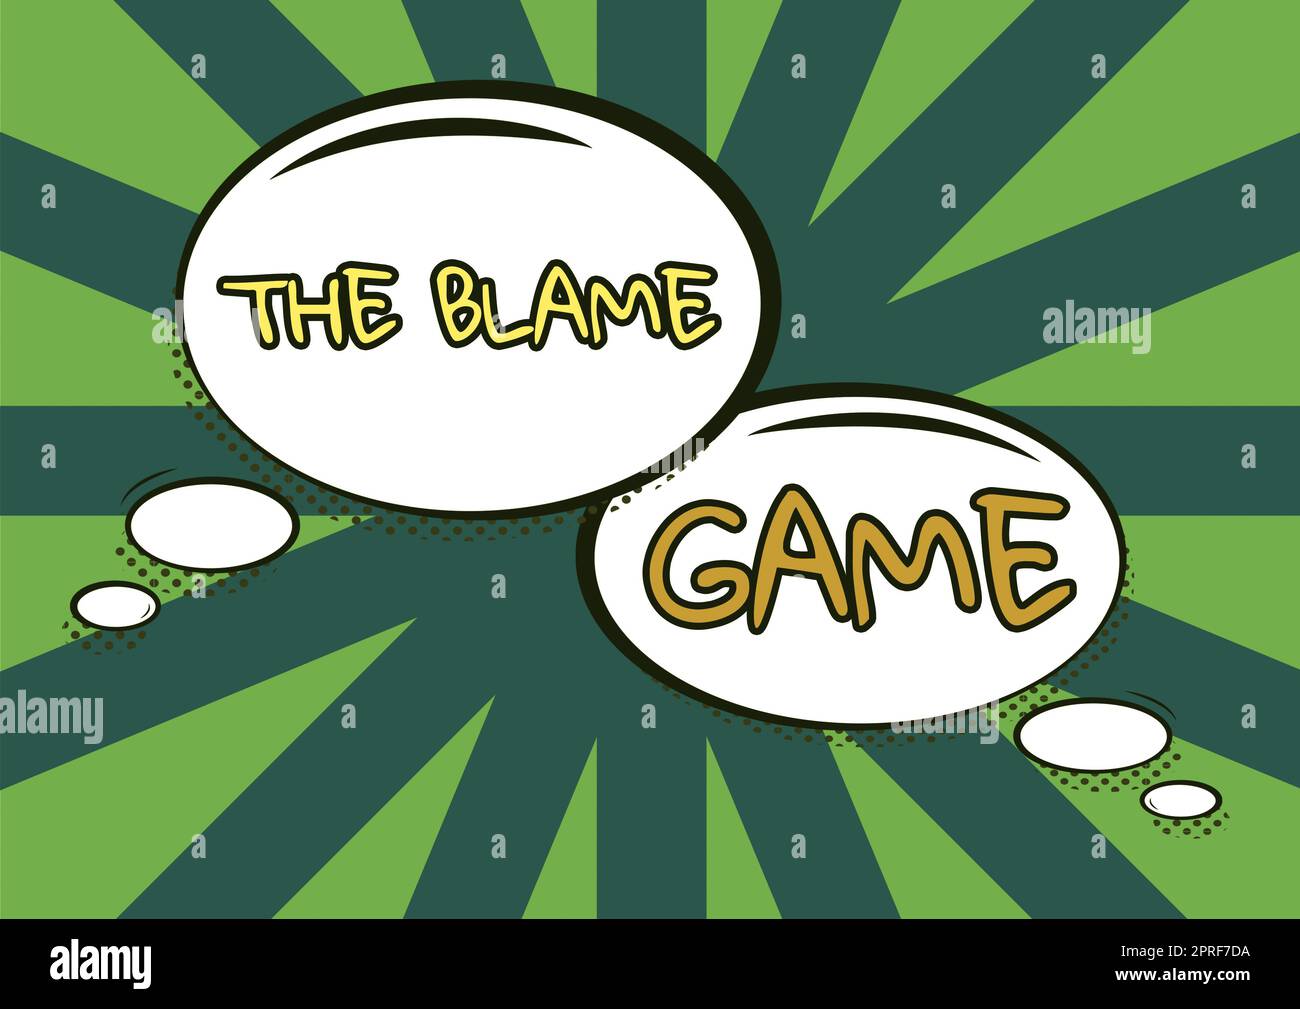 Text showing inspiration The Blame GameA situation when people attempt to blame one another, Business showcase A situation when showing attempt to bla Stock Photo